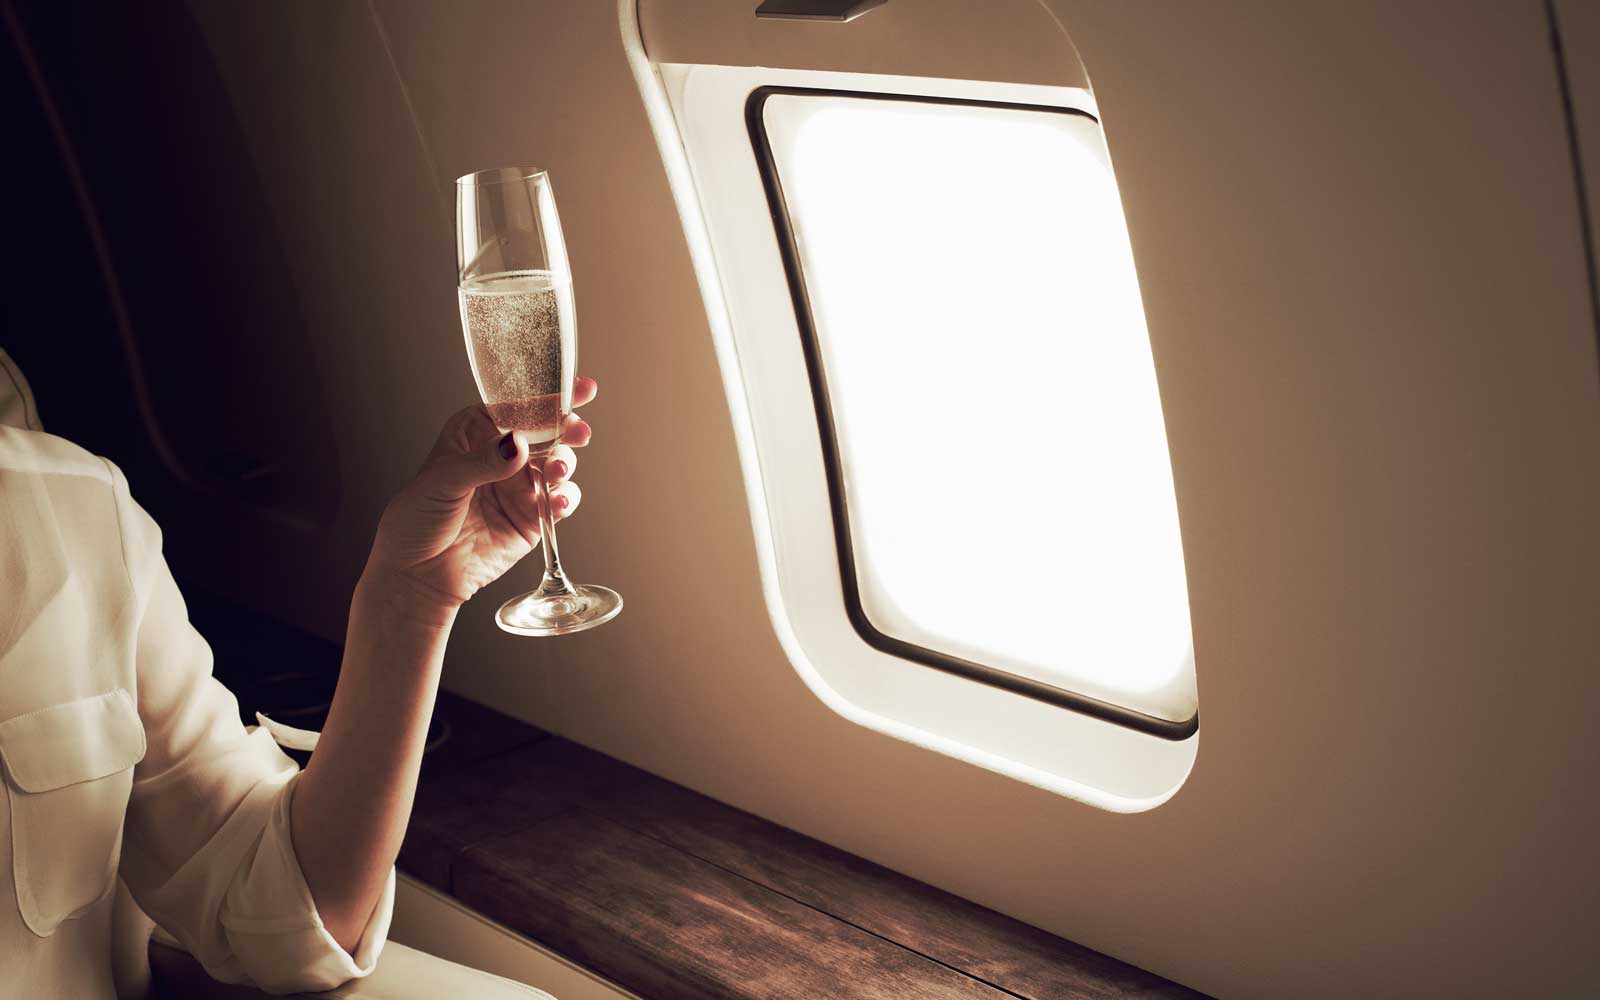 Business Class 'Slammertime' Ritual Sparks Outrage At 40,000ft